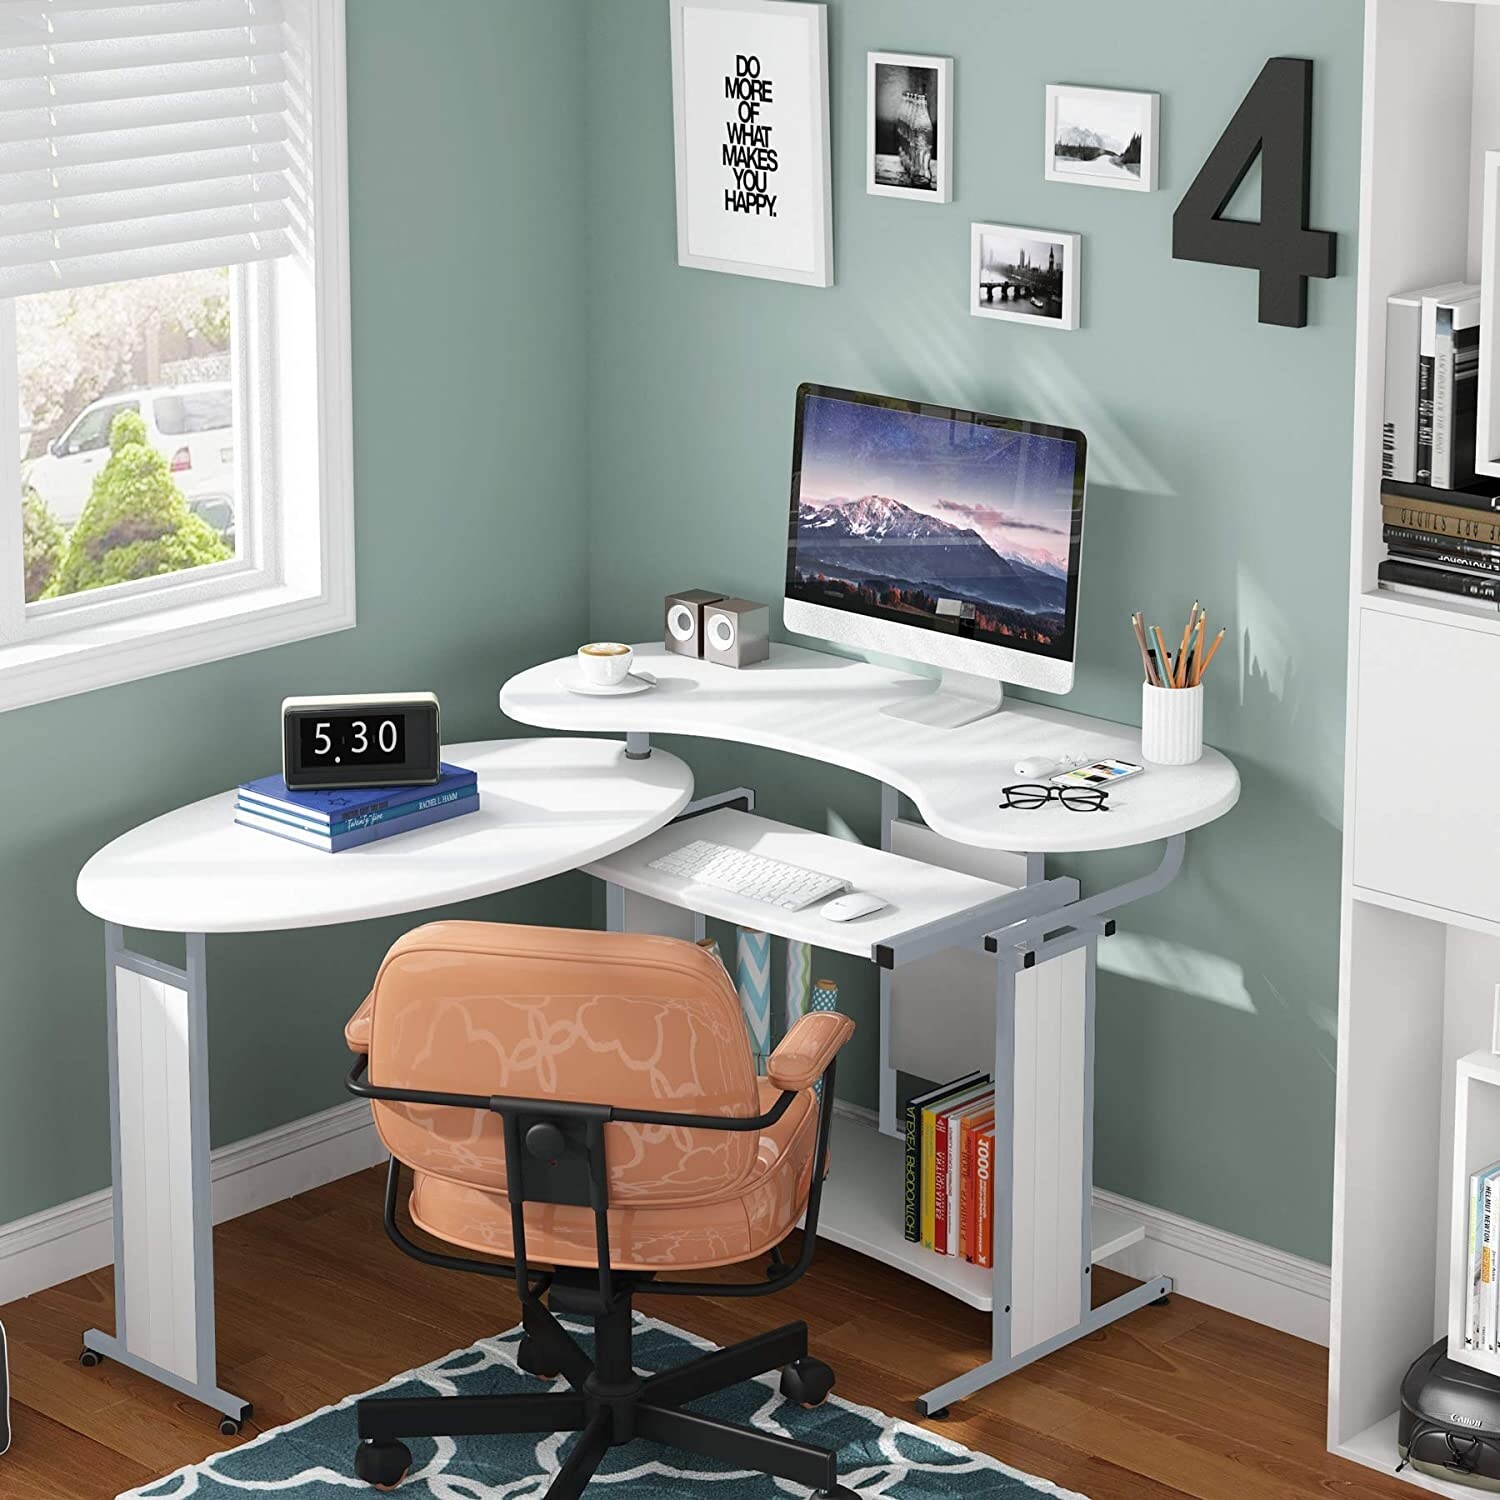 https://ak1.ostkcdn.com/images/products/is/images/direct/354c18d5fa9d57d03180d70477ad1bf8c0d9103c/Reversible-L-Shaped-Computer-Desk%2C-Modern-Rotating-Office-Corner-Table.jpg